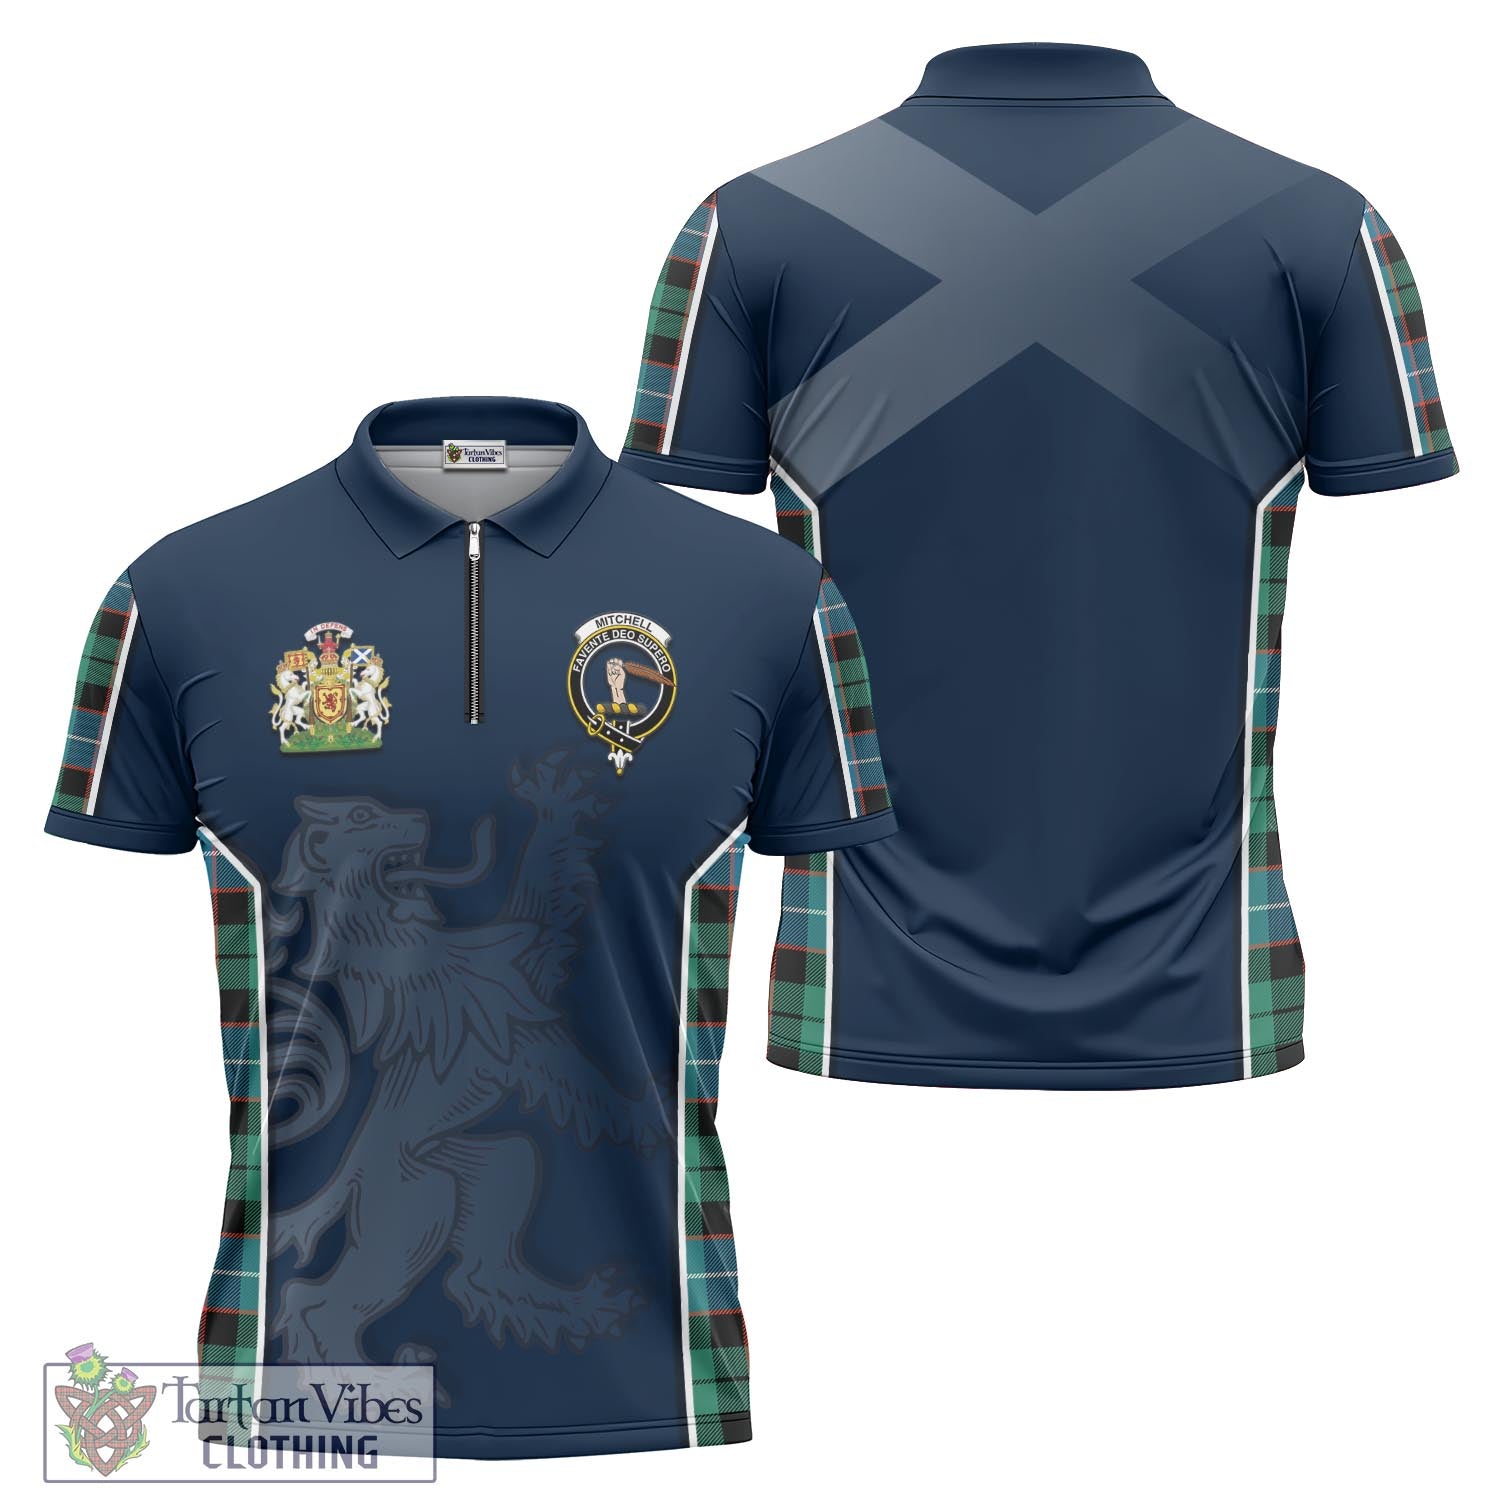 Tartan Vibes Clothing Mitchell Ancient Tartan Zipper Polo Shirt with Family Crest and Lion Rampant Vibes Sport Style